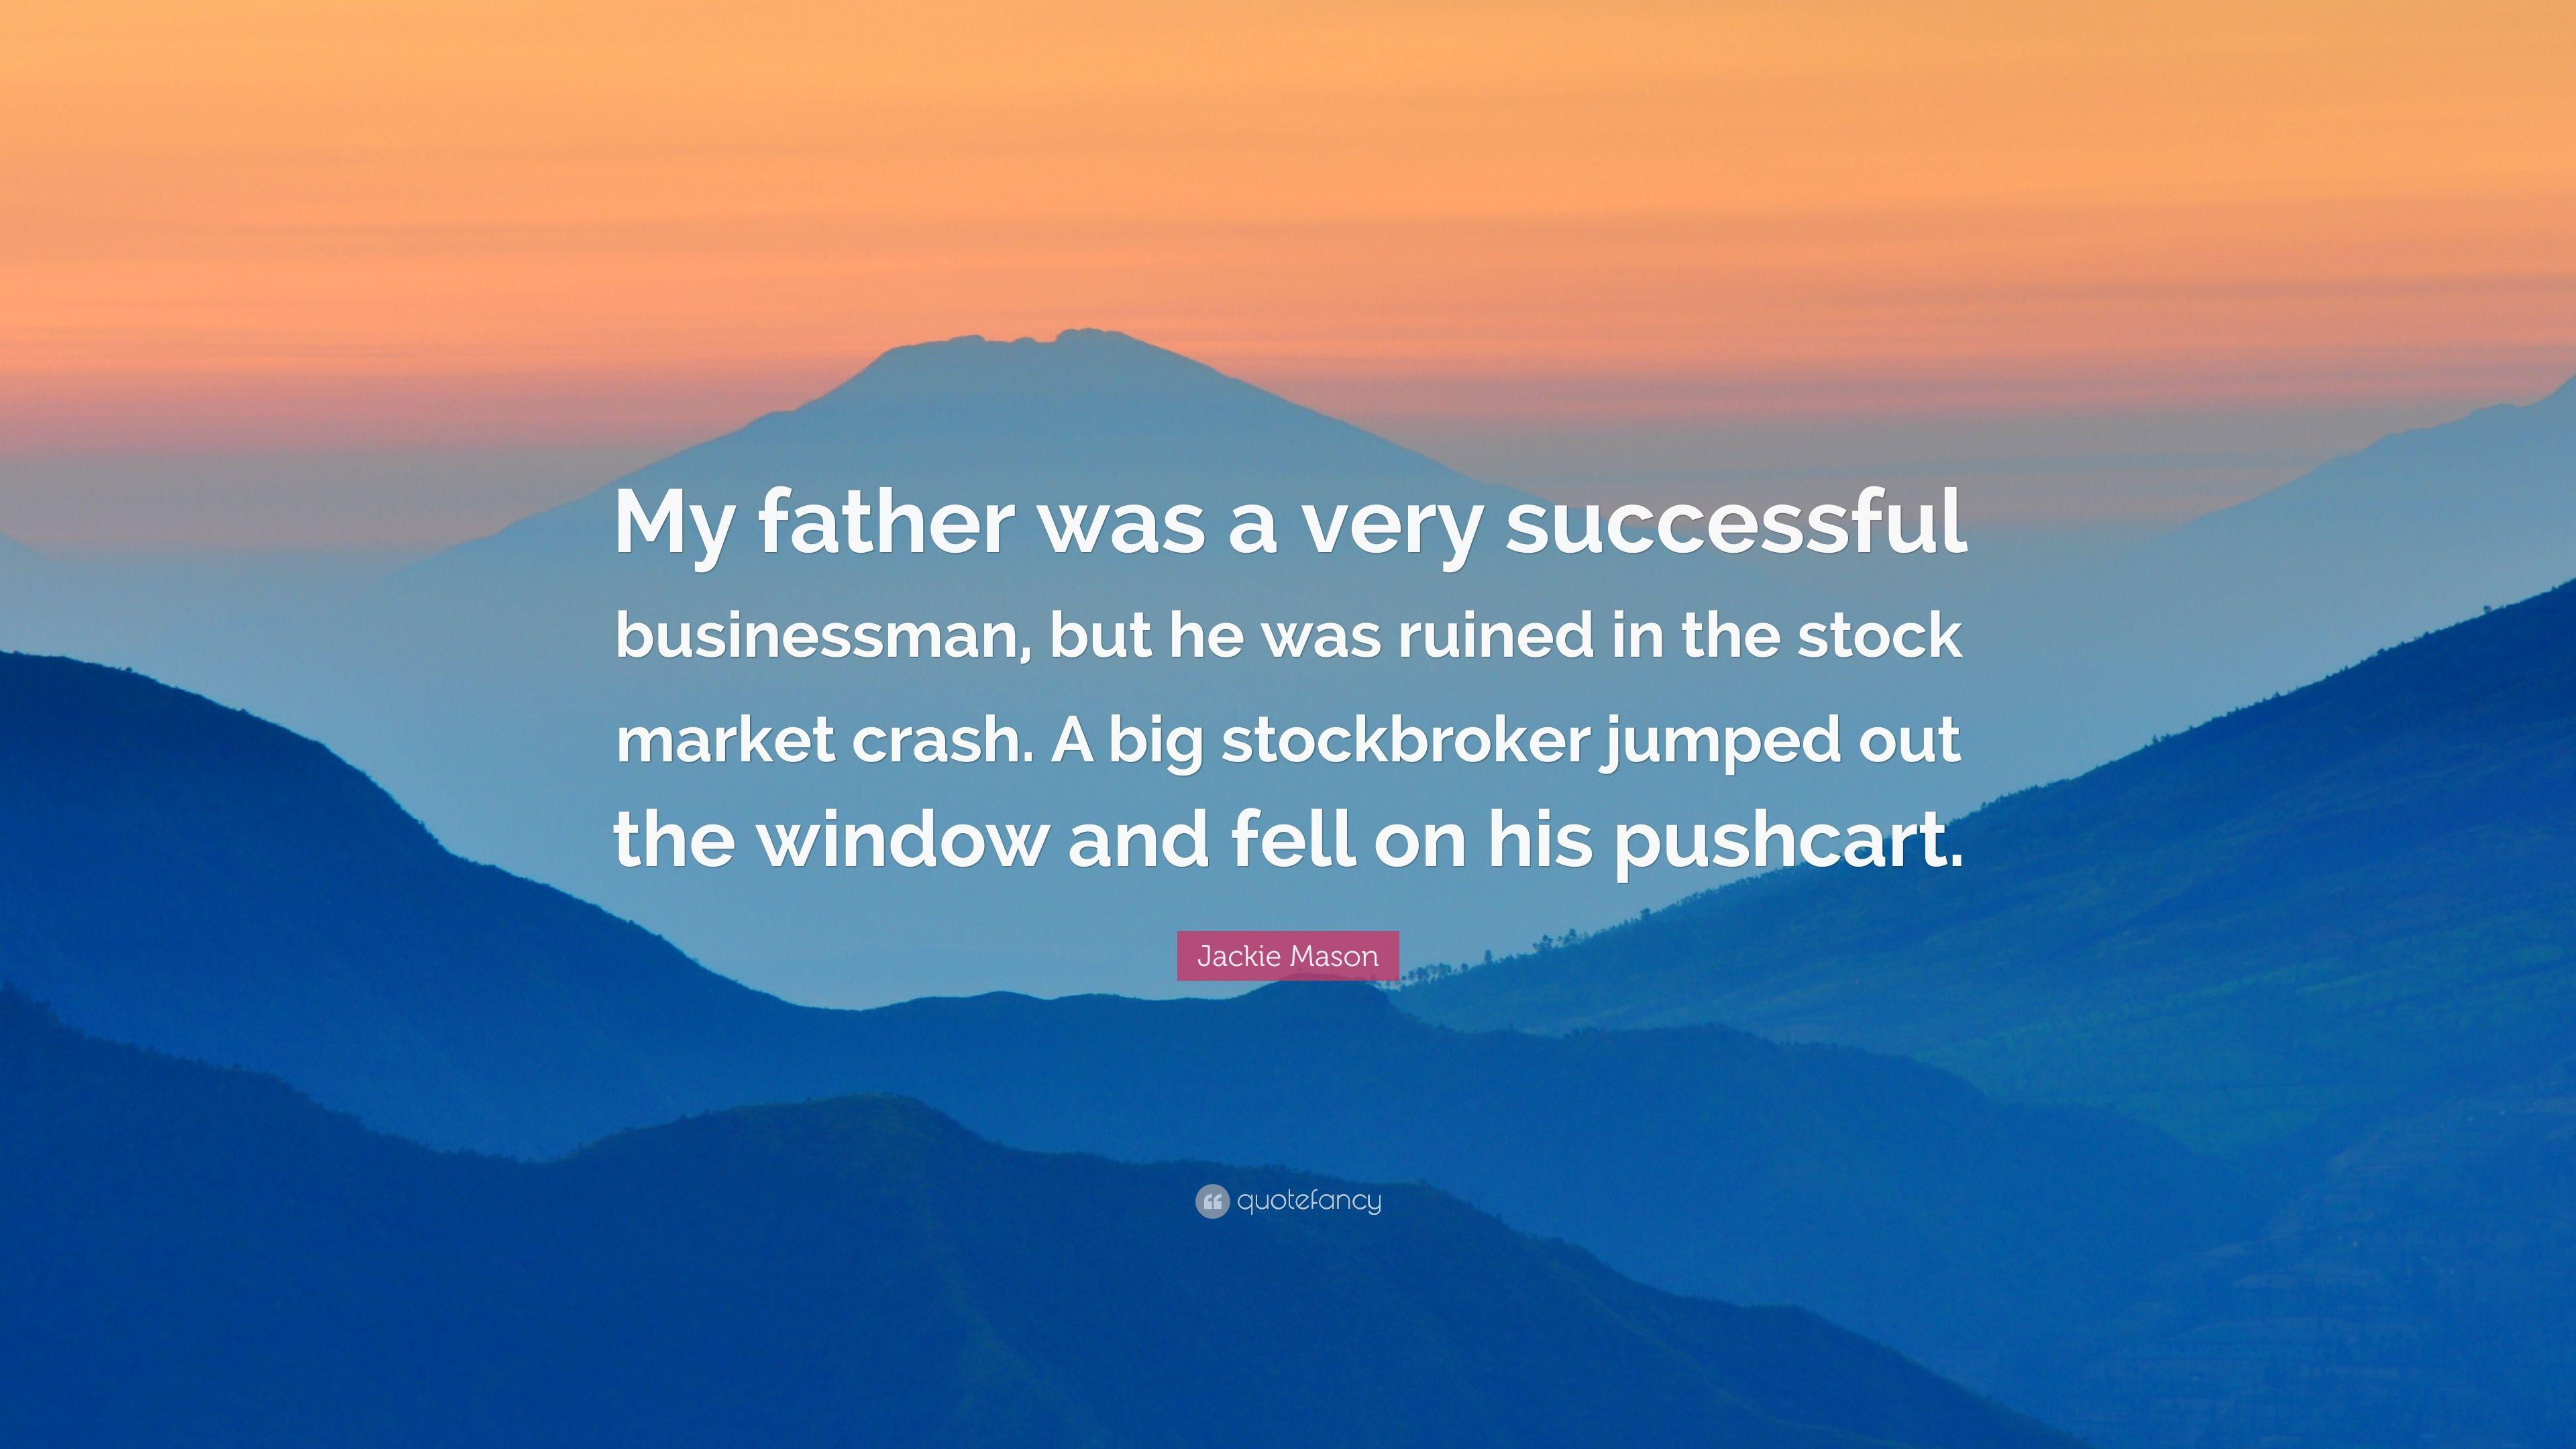 Jackie Mason Quote: “My father was a very successful businessman